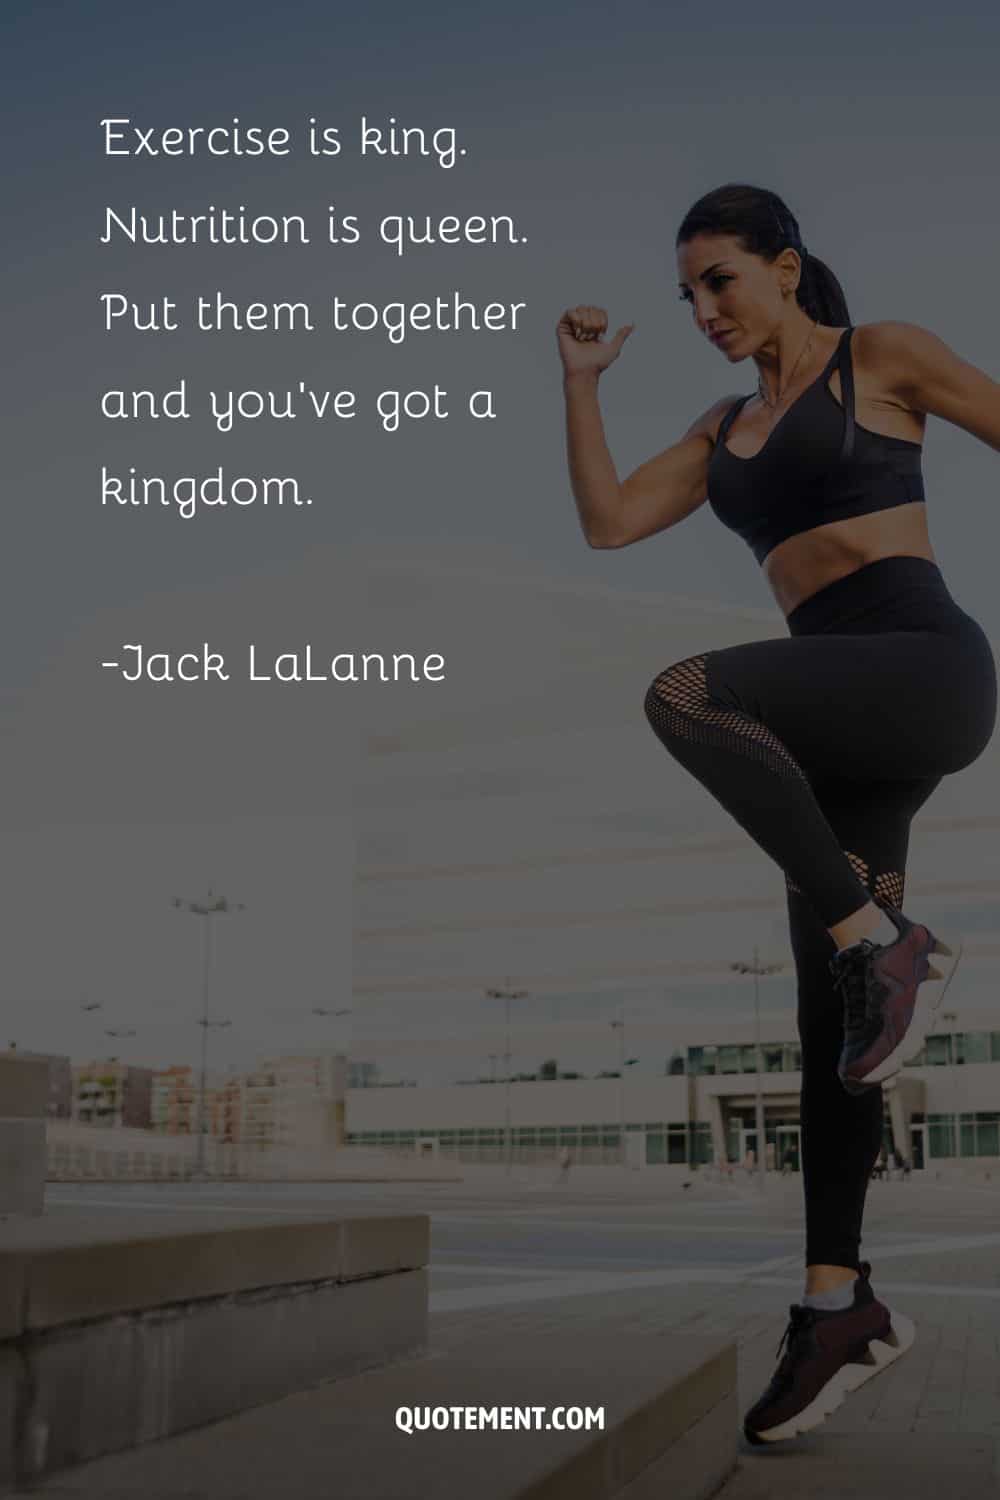 fit girl running image representing female fitness quote